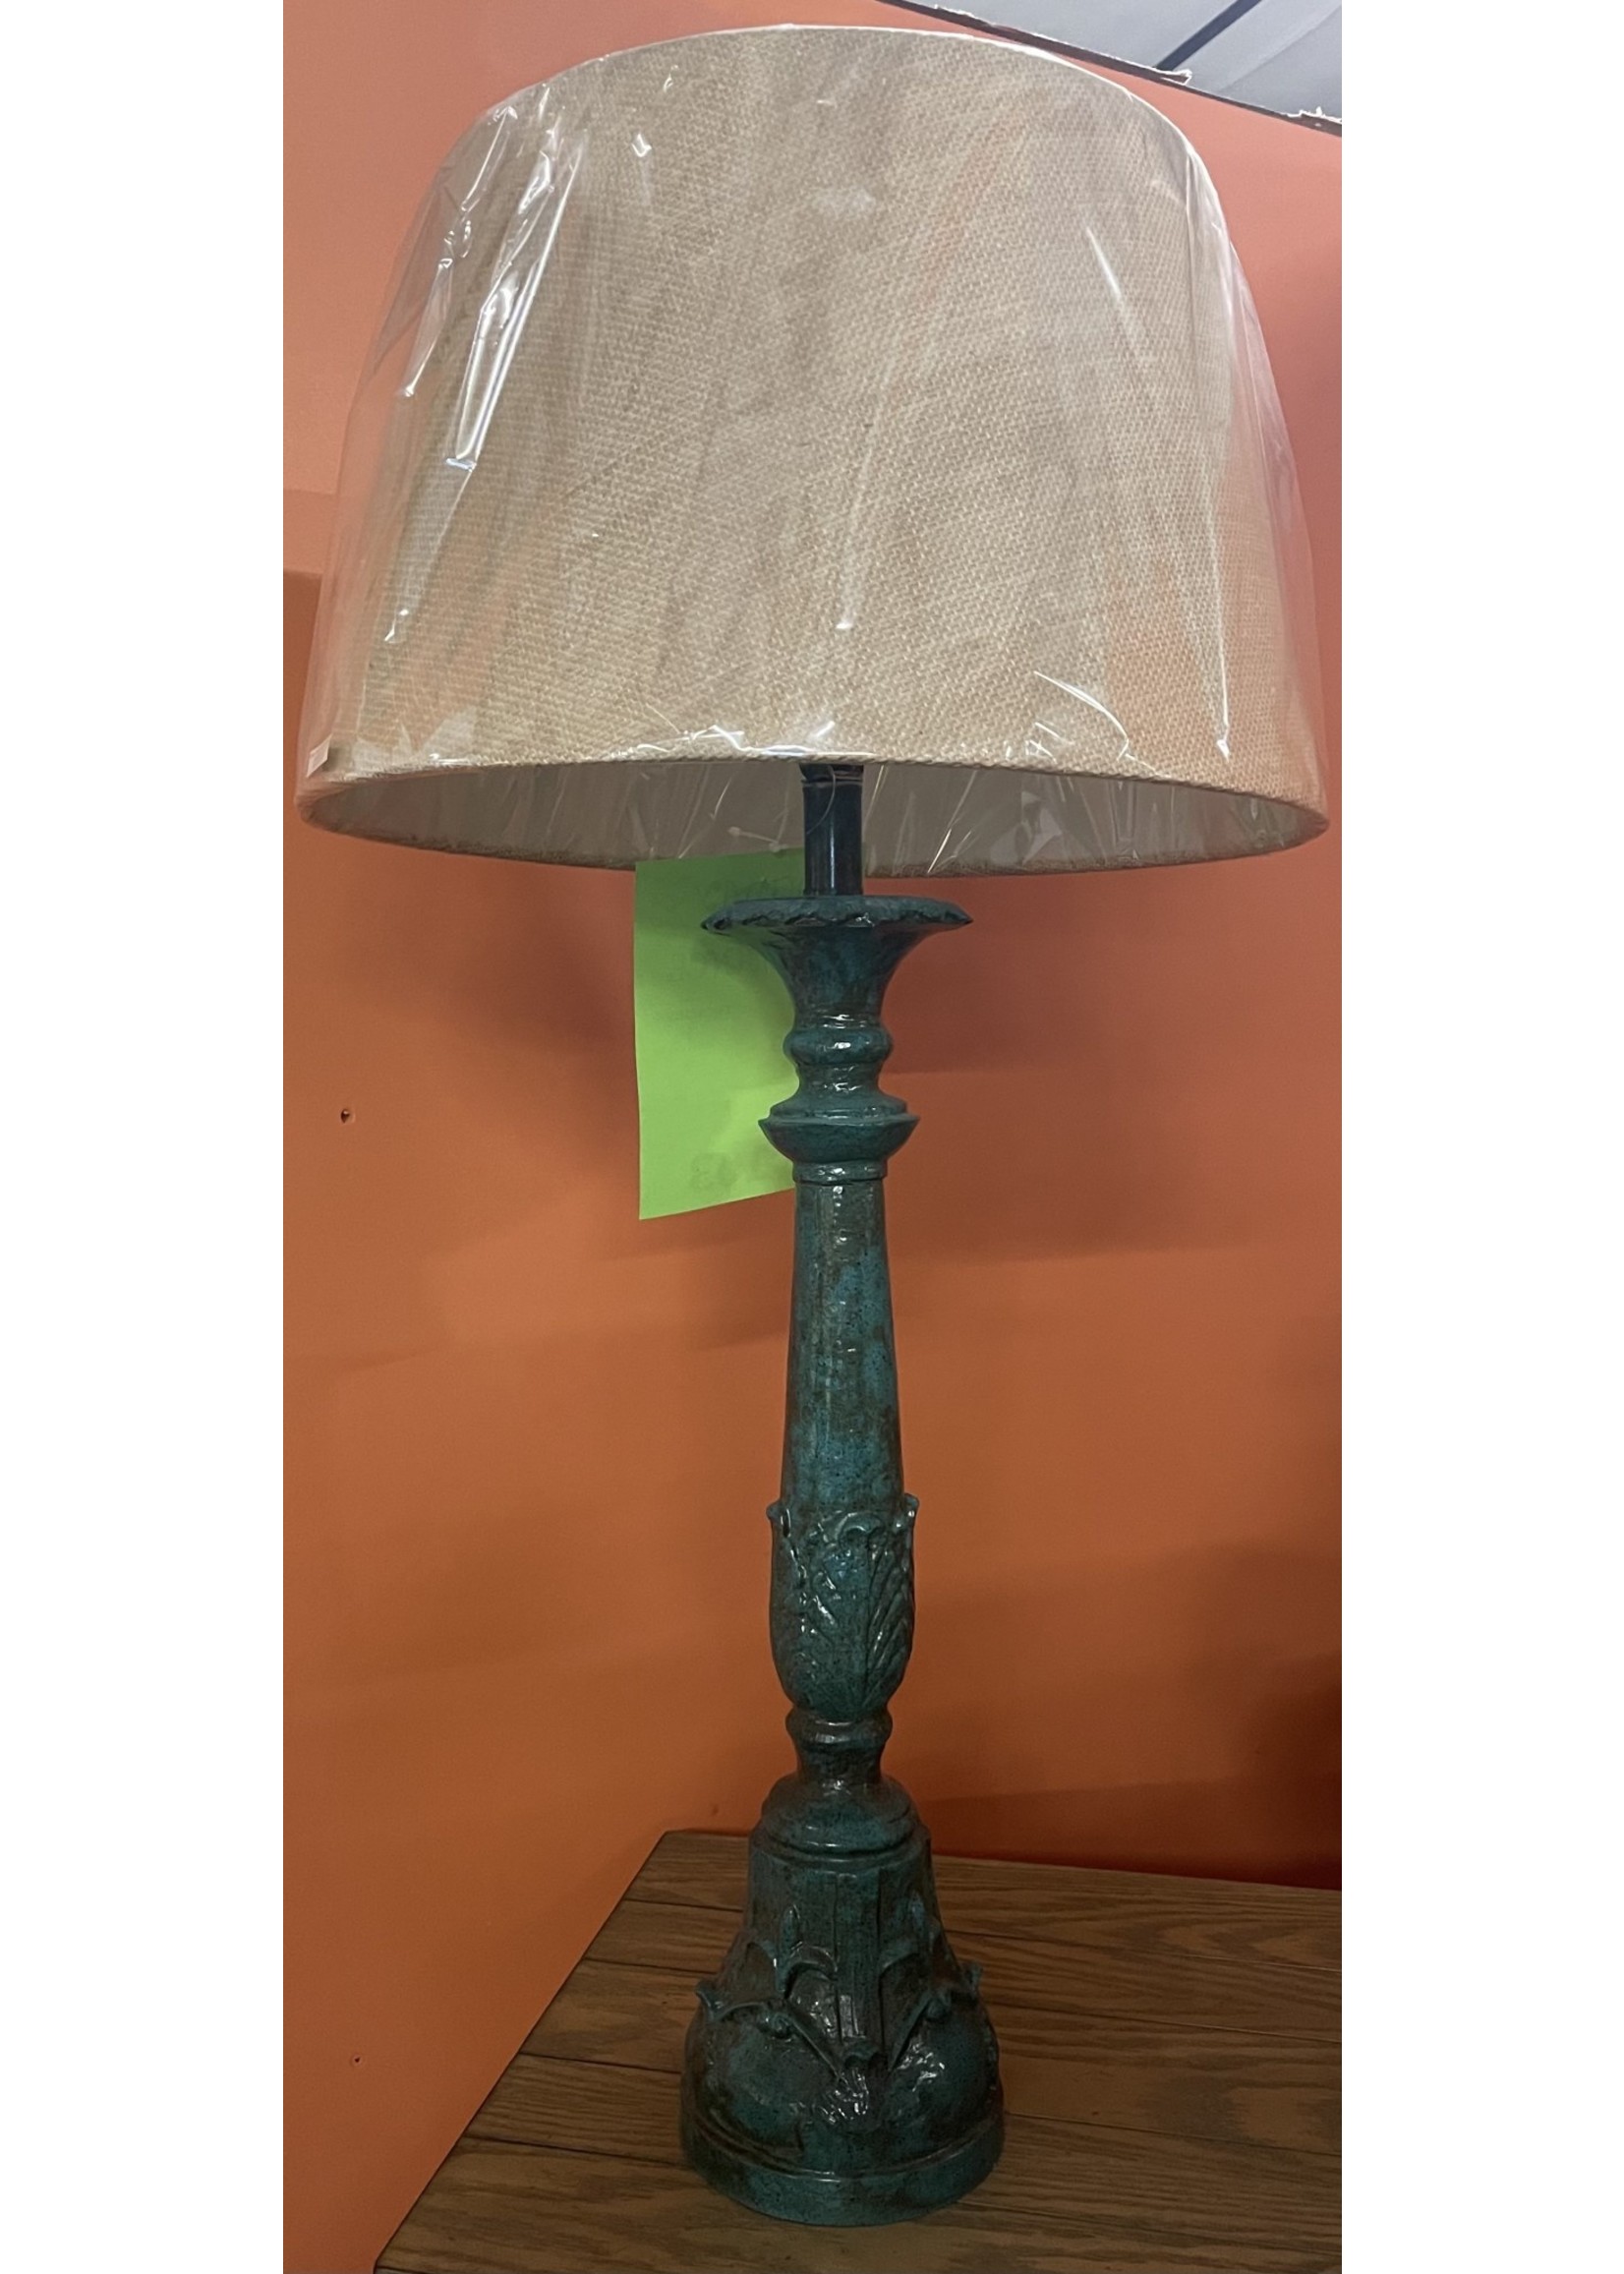 VINTAGE DIRECT CL69873-T LAMP TURQUOISE RUSTIC WOOD LOOK